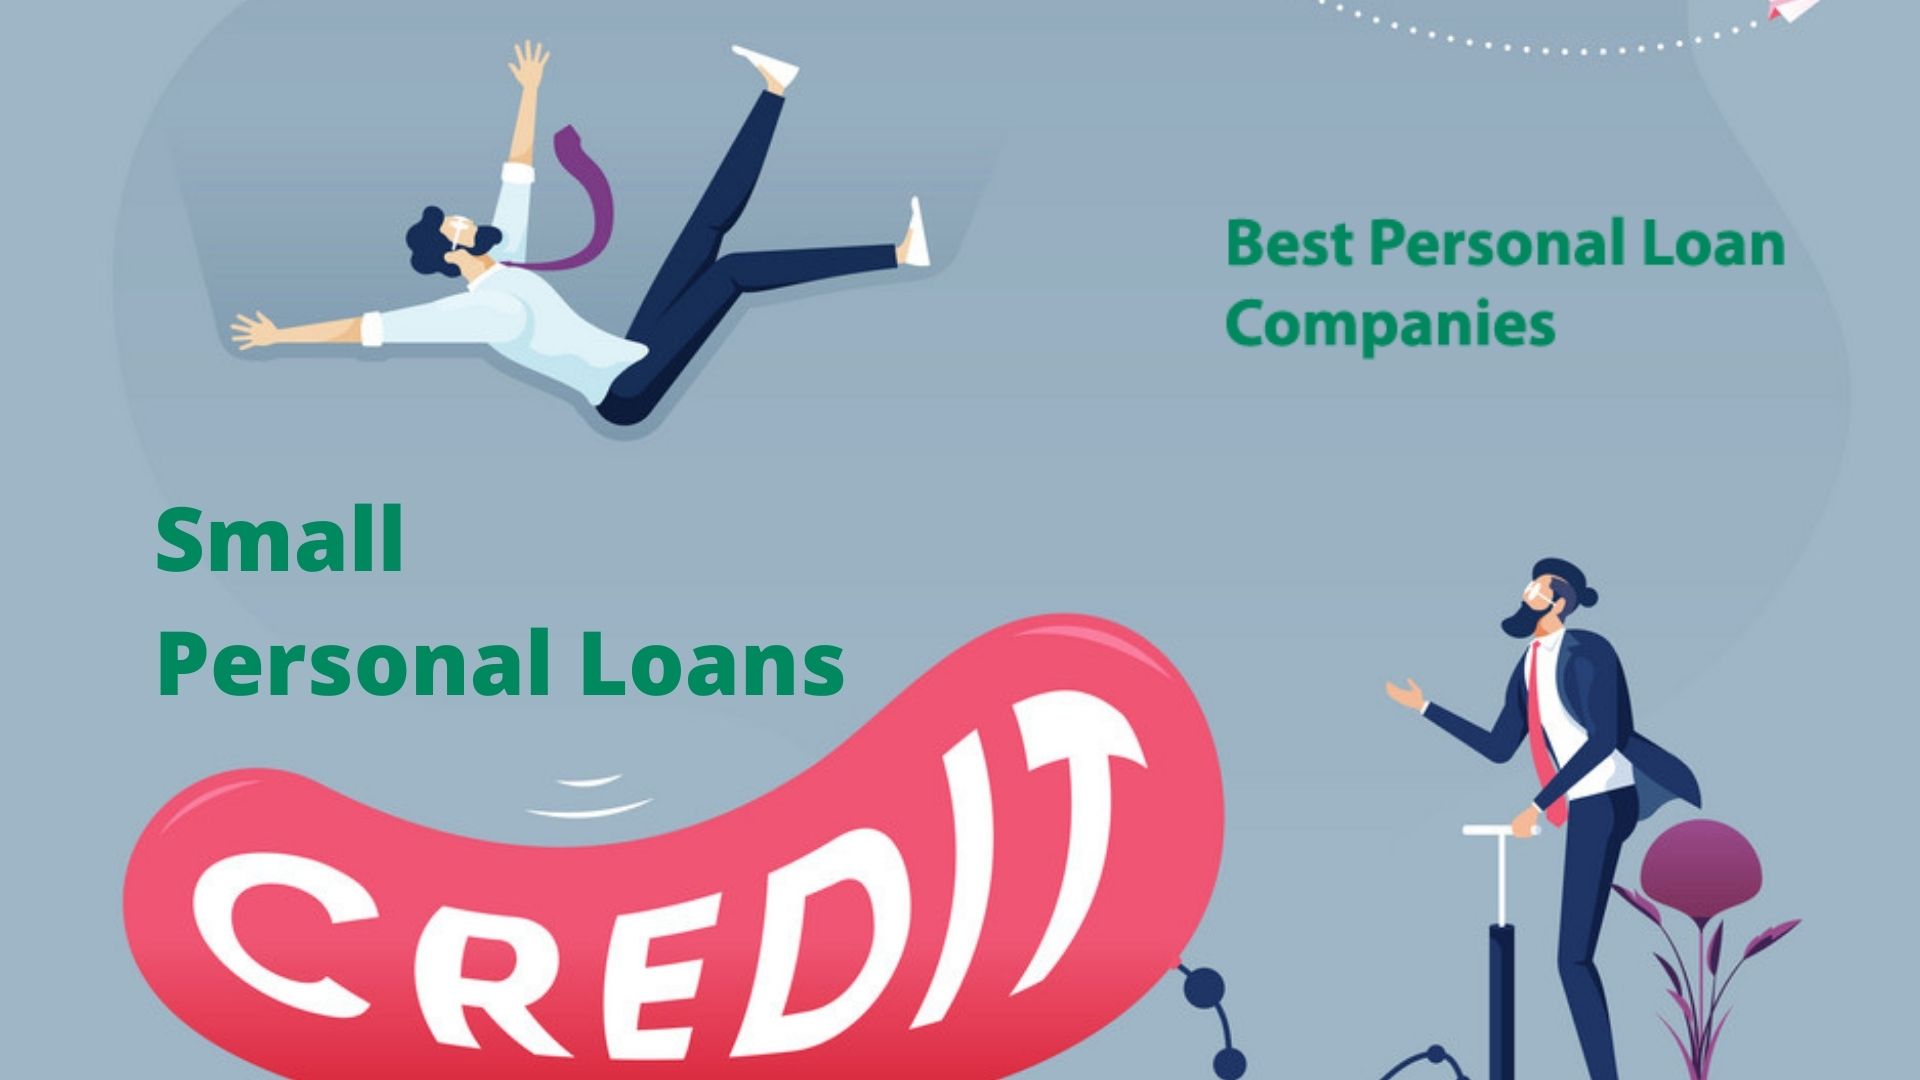 Small personal loans